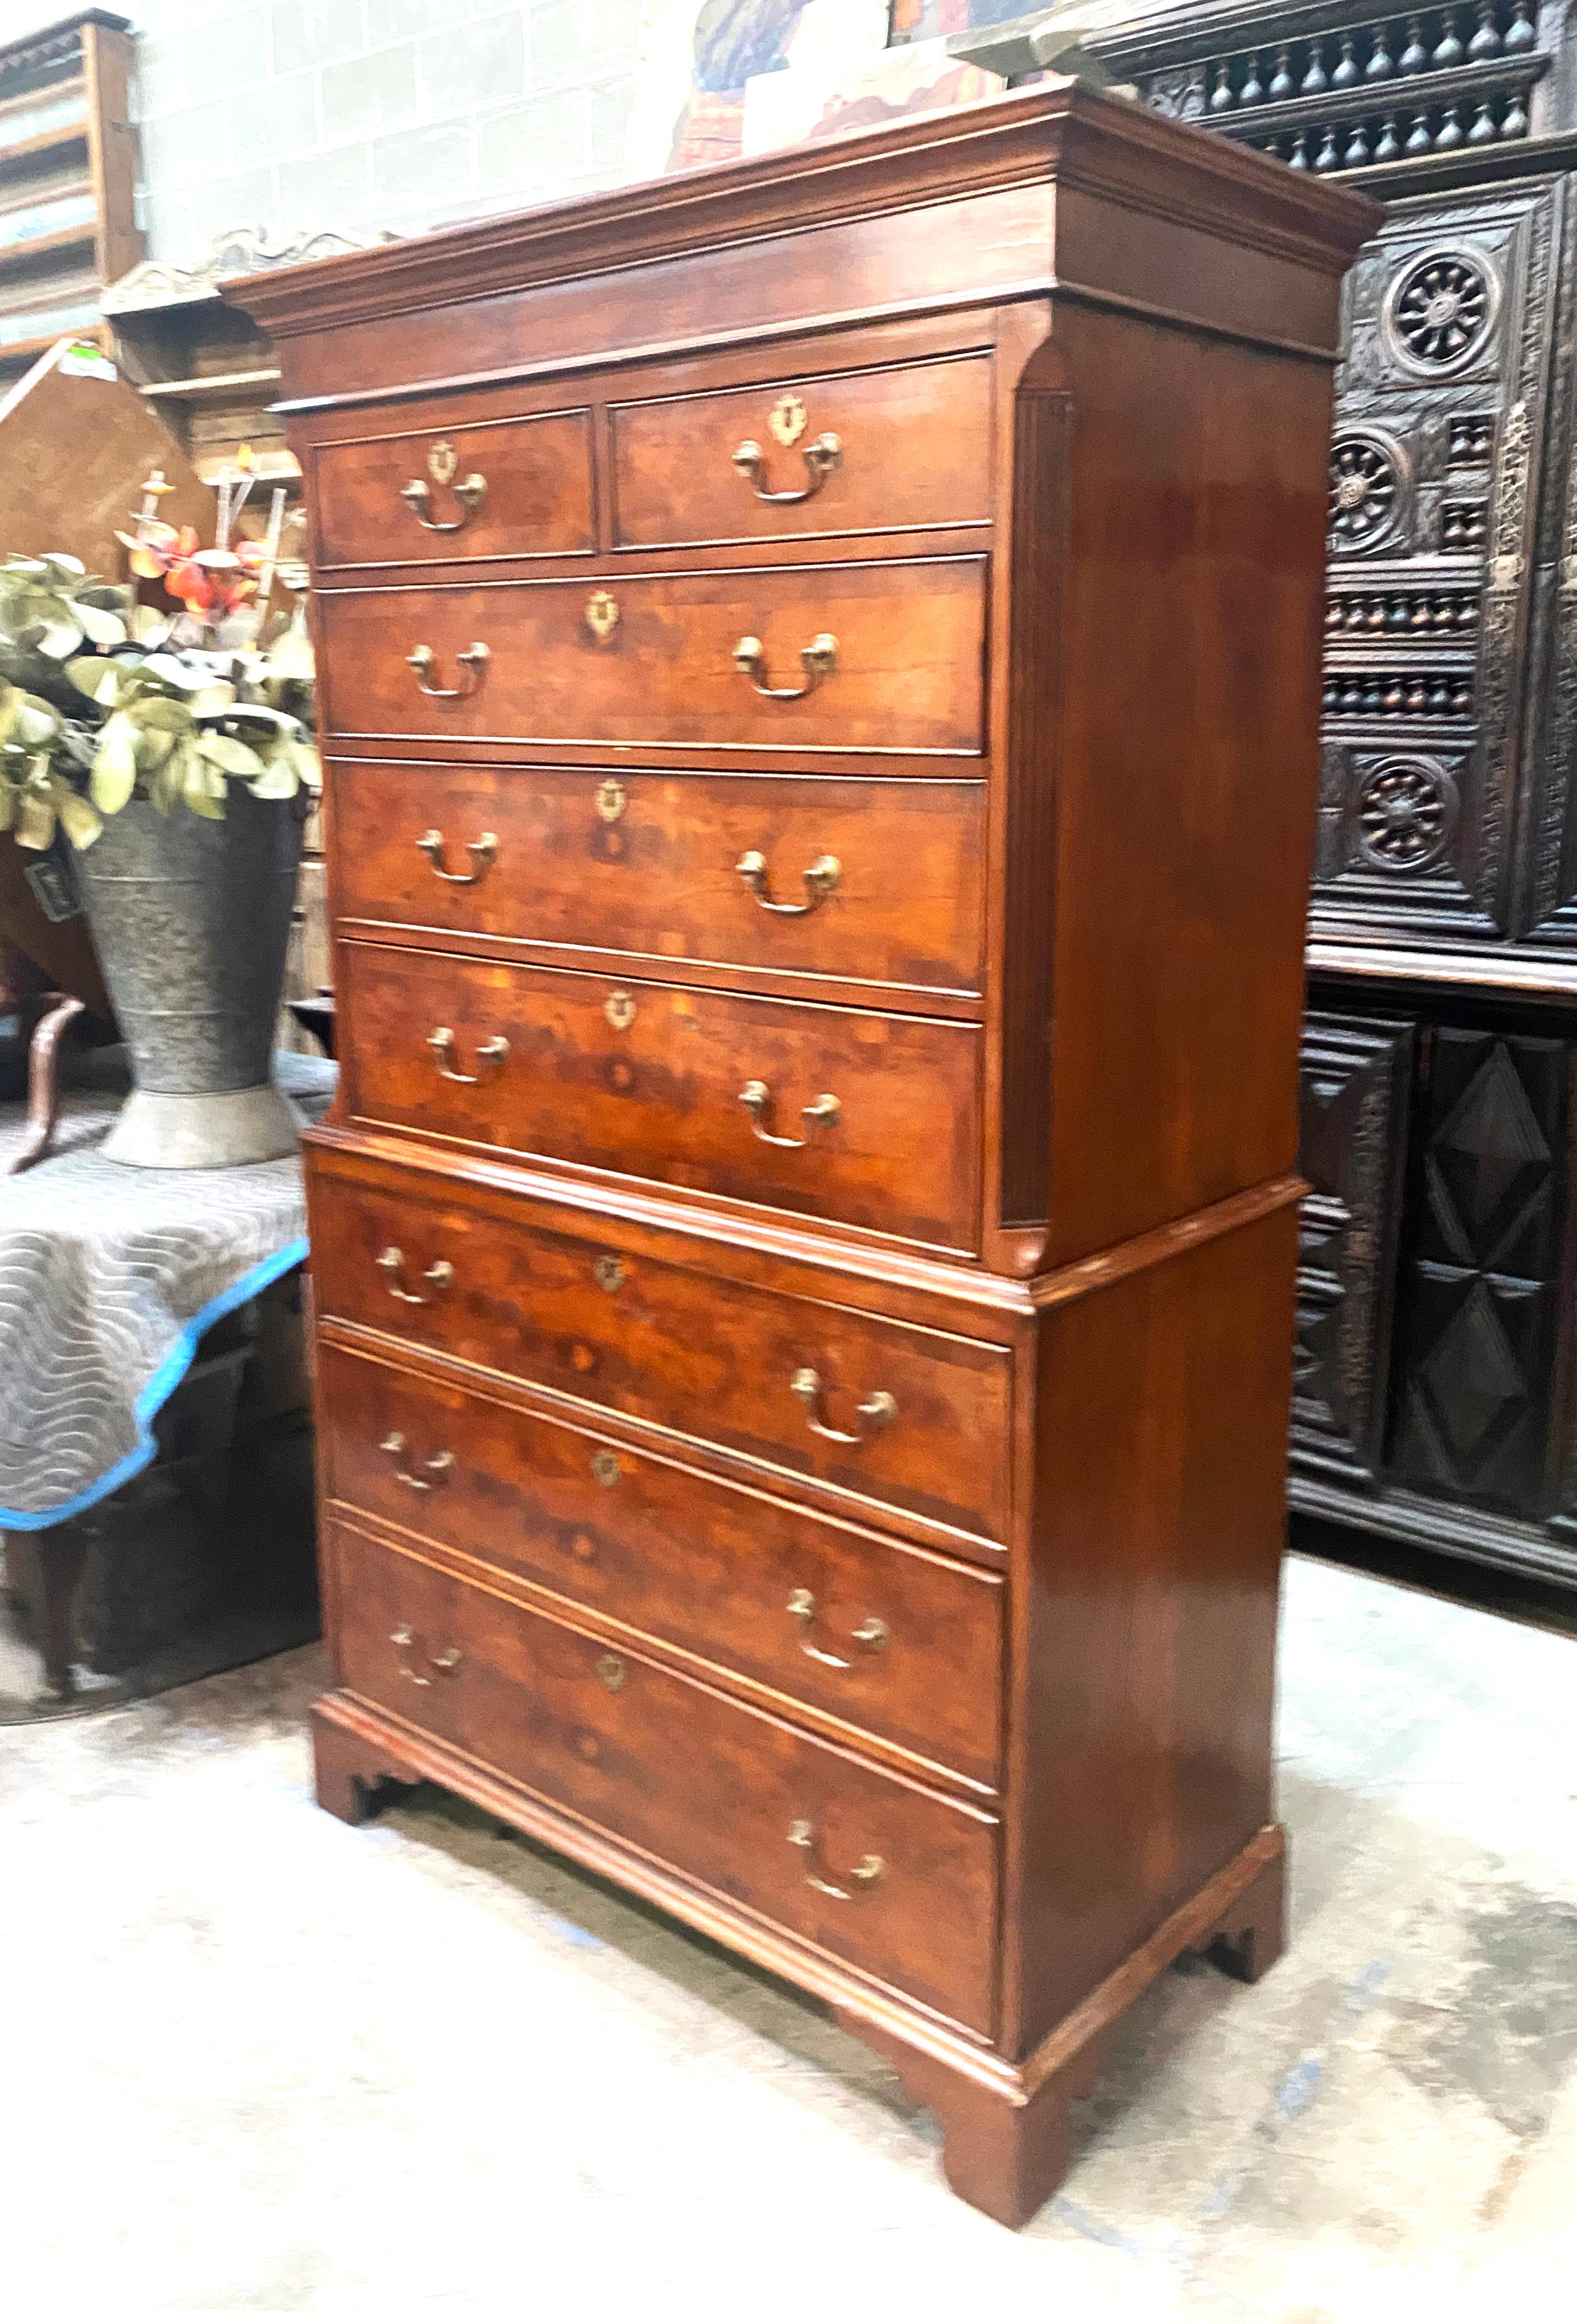 Exquisite antique English oak 18th century Georgian era chest on chest - chest of drawers. Late 18th - Early 19th c. A gorgeous example of an 18th century English 